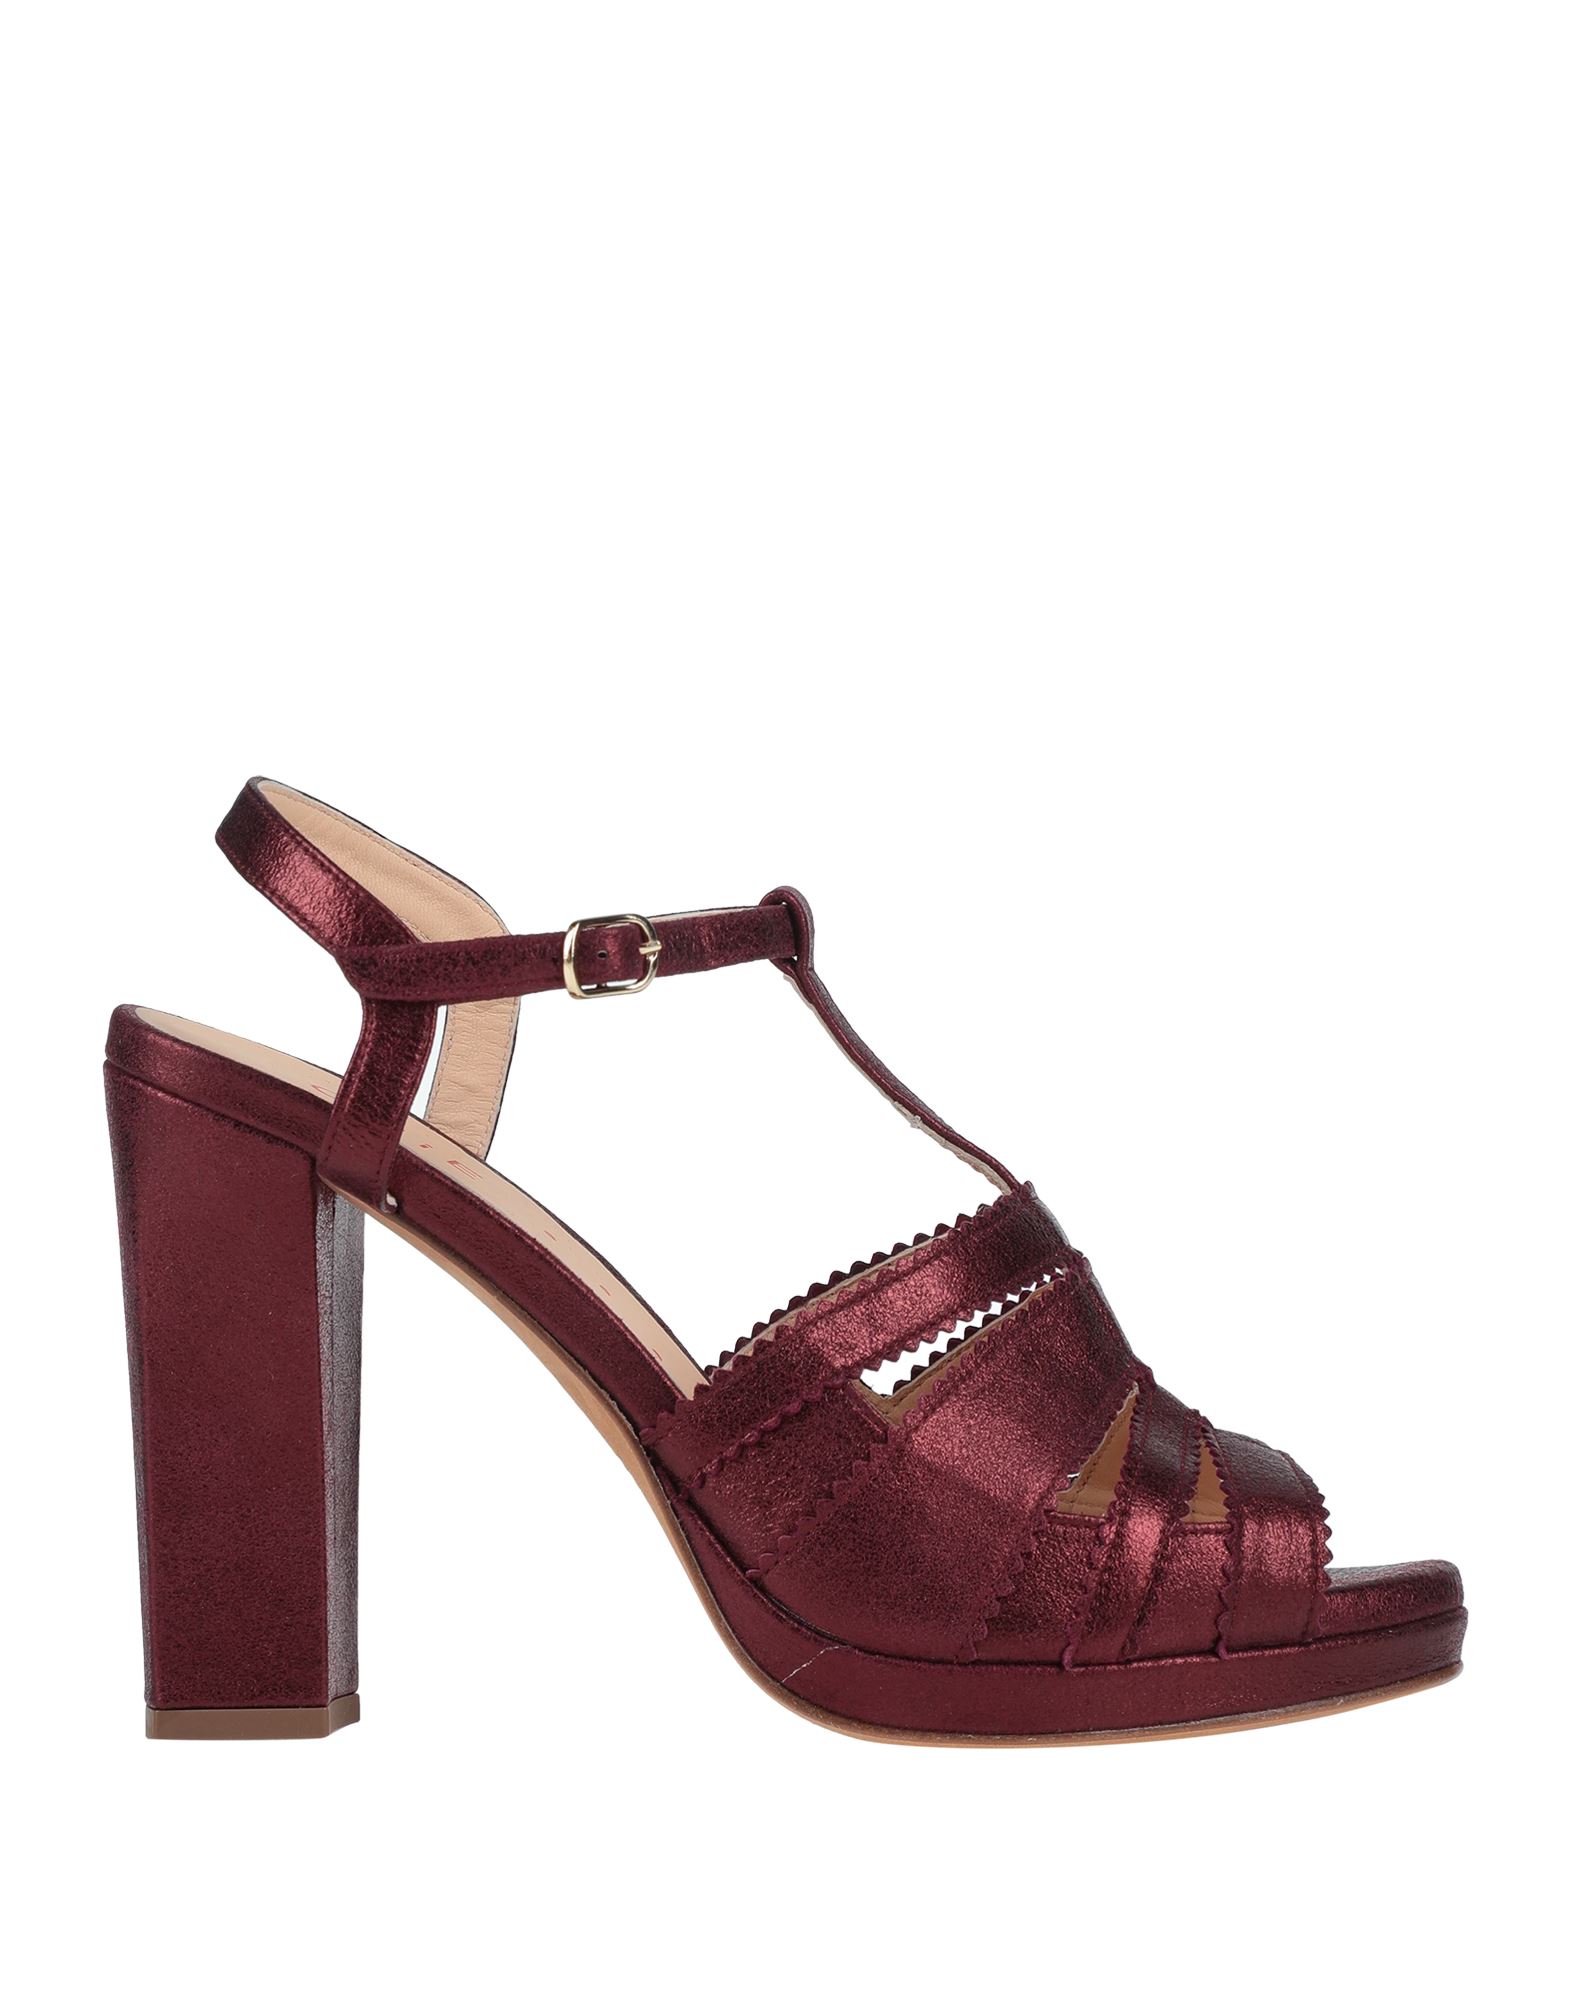 Chie By Chie Mihara Sandals In Maroon